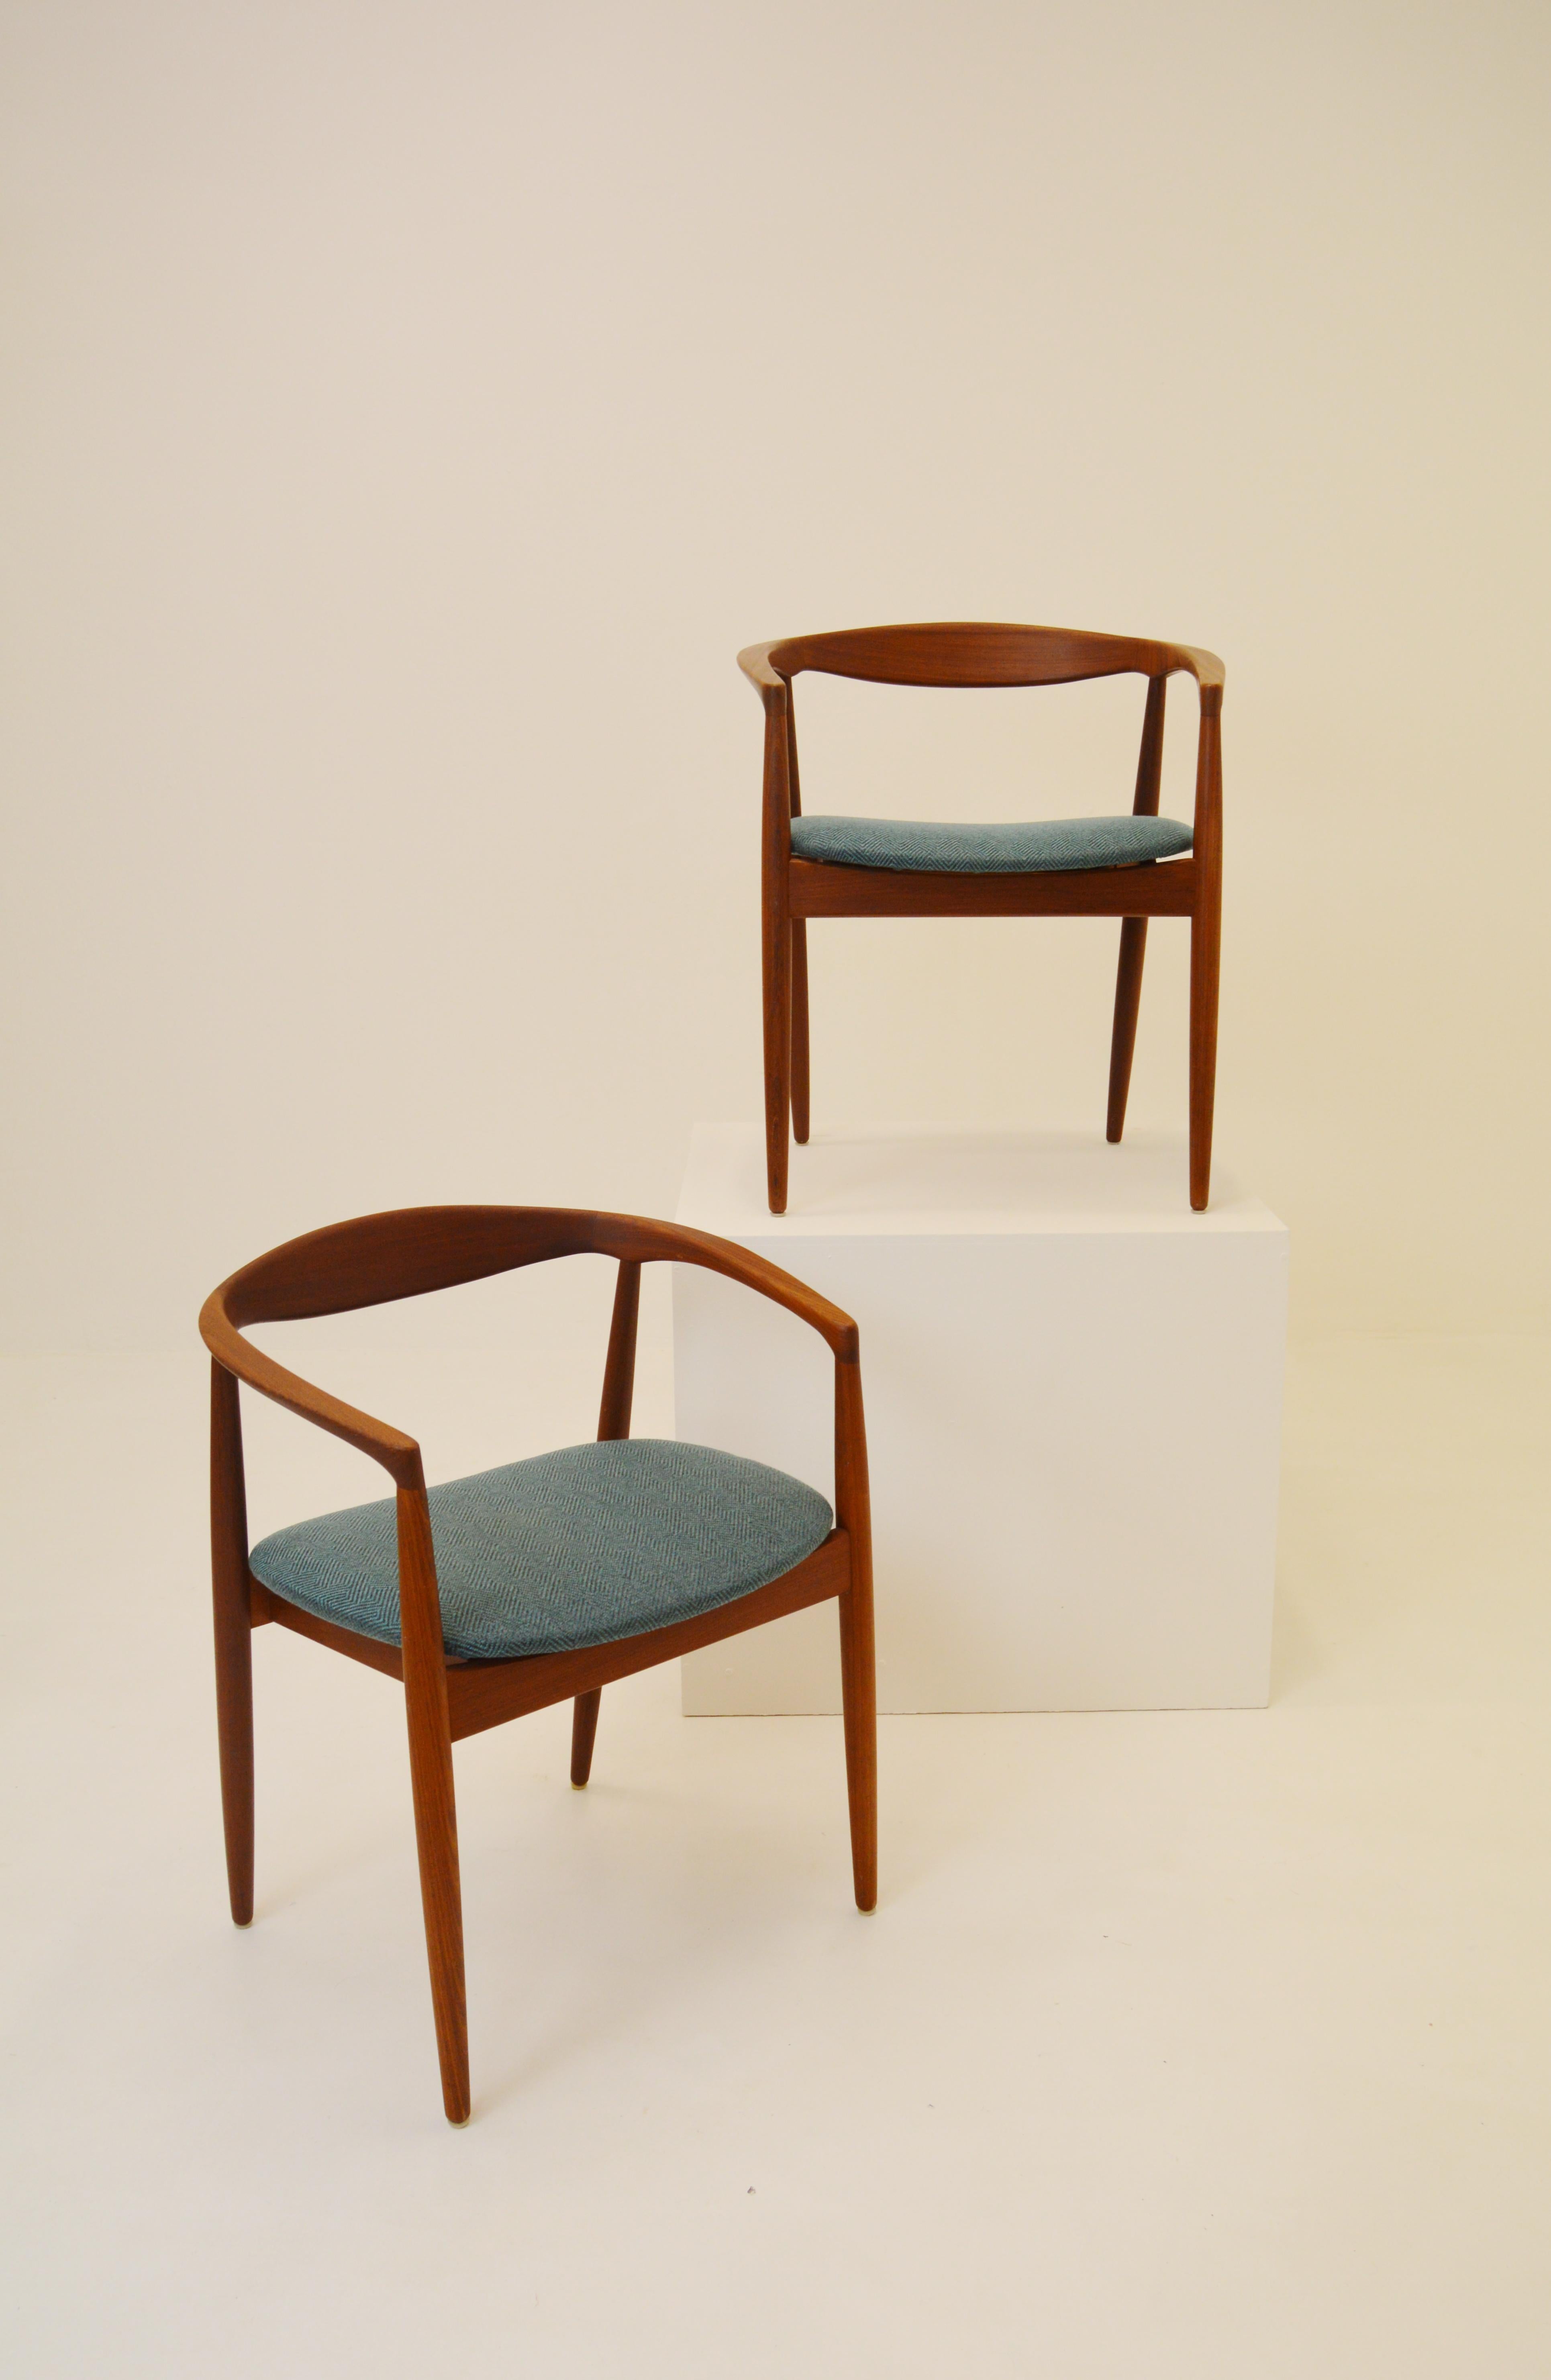 A nice pair of armchairs or office desk chairs.
Designed by Kai Kristansen.
Newly upholstered fabric.